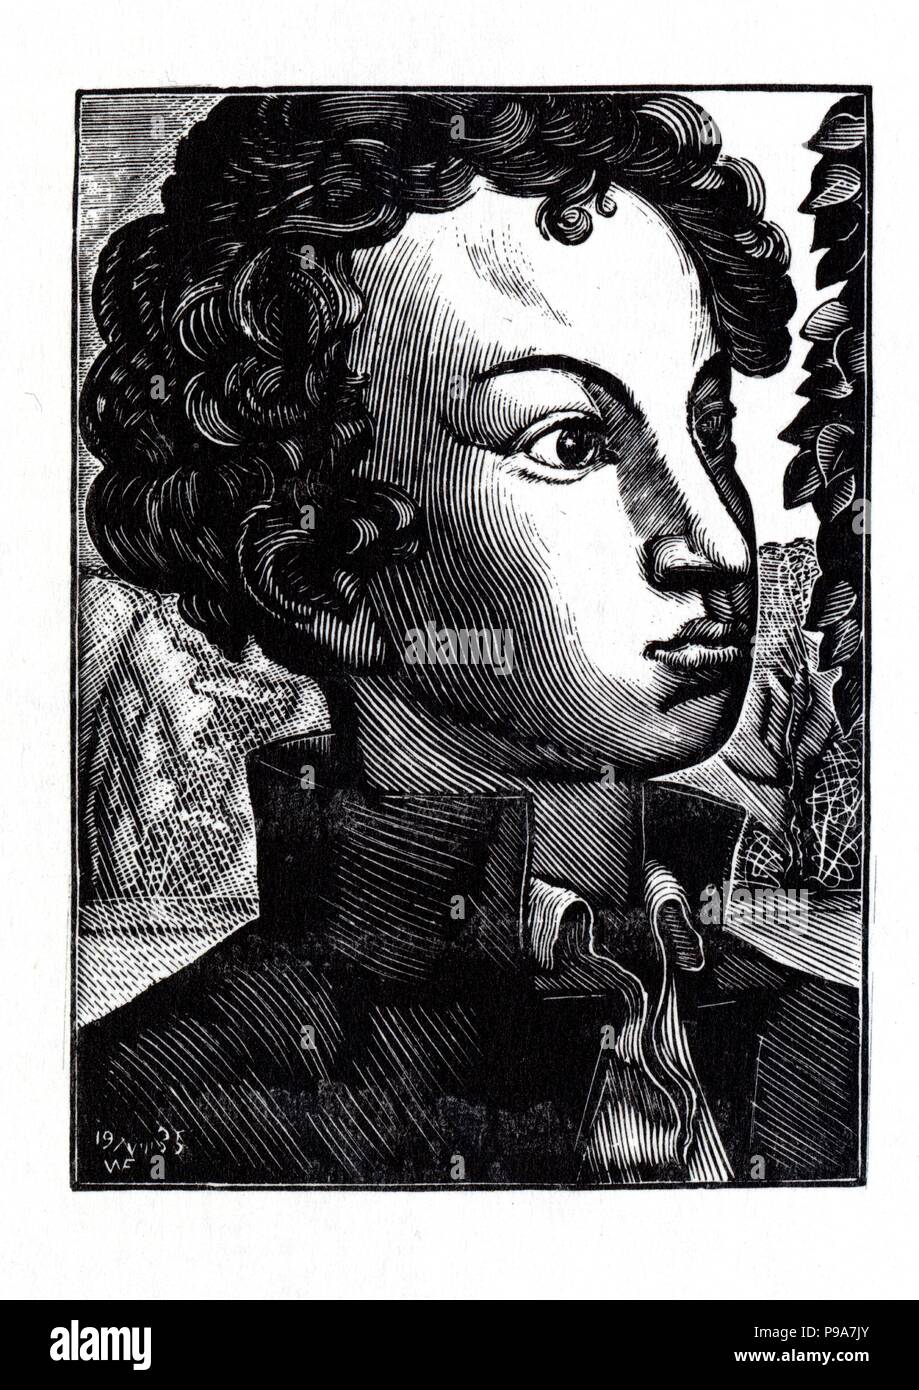 Pushkin as a Graduate of Lyceum. Museum: State Tretyakov Gallery, Moscow. Stock Photo